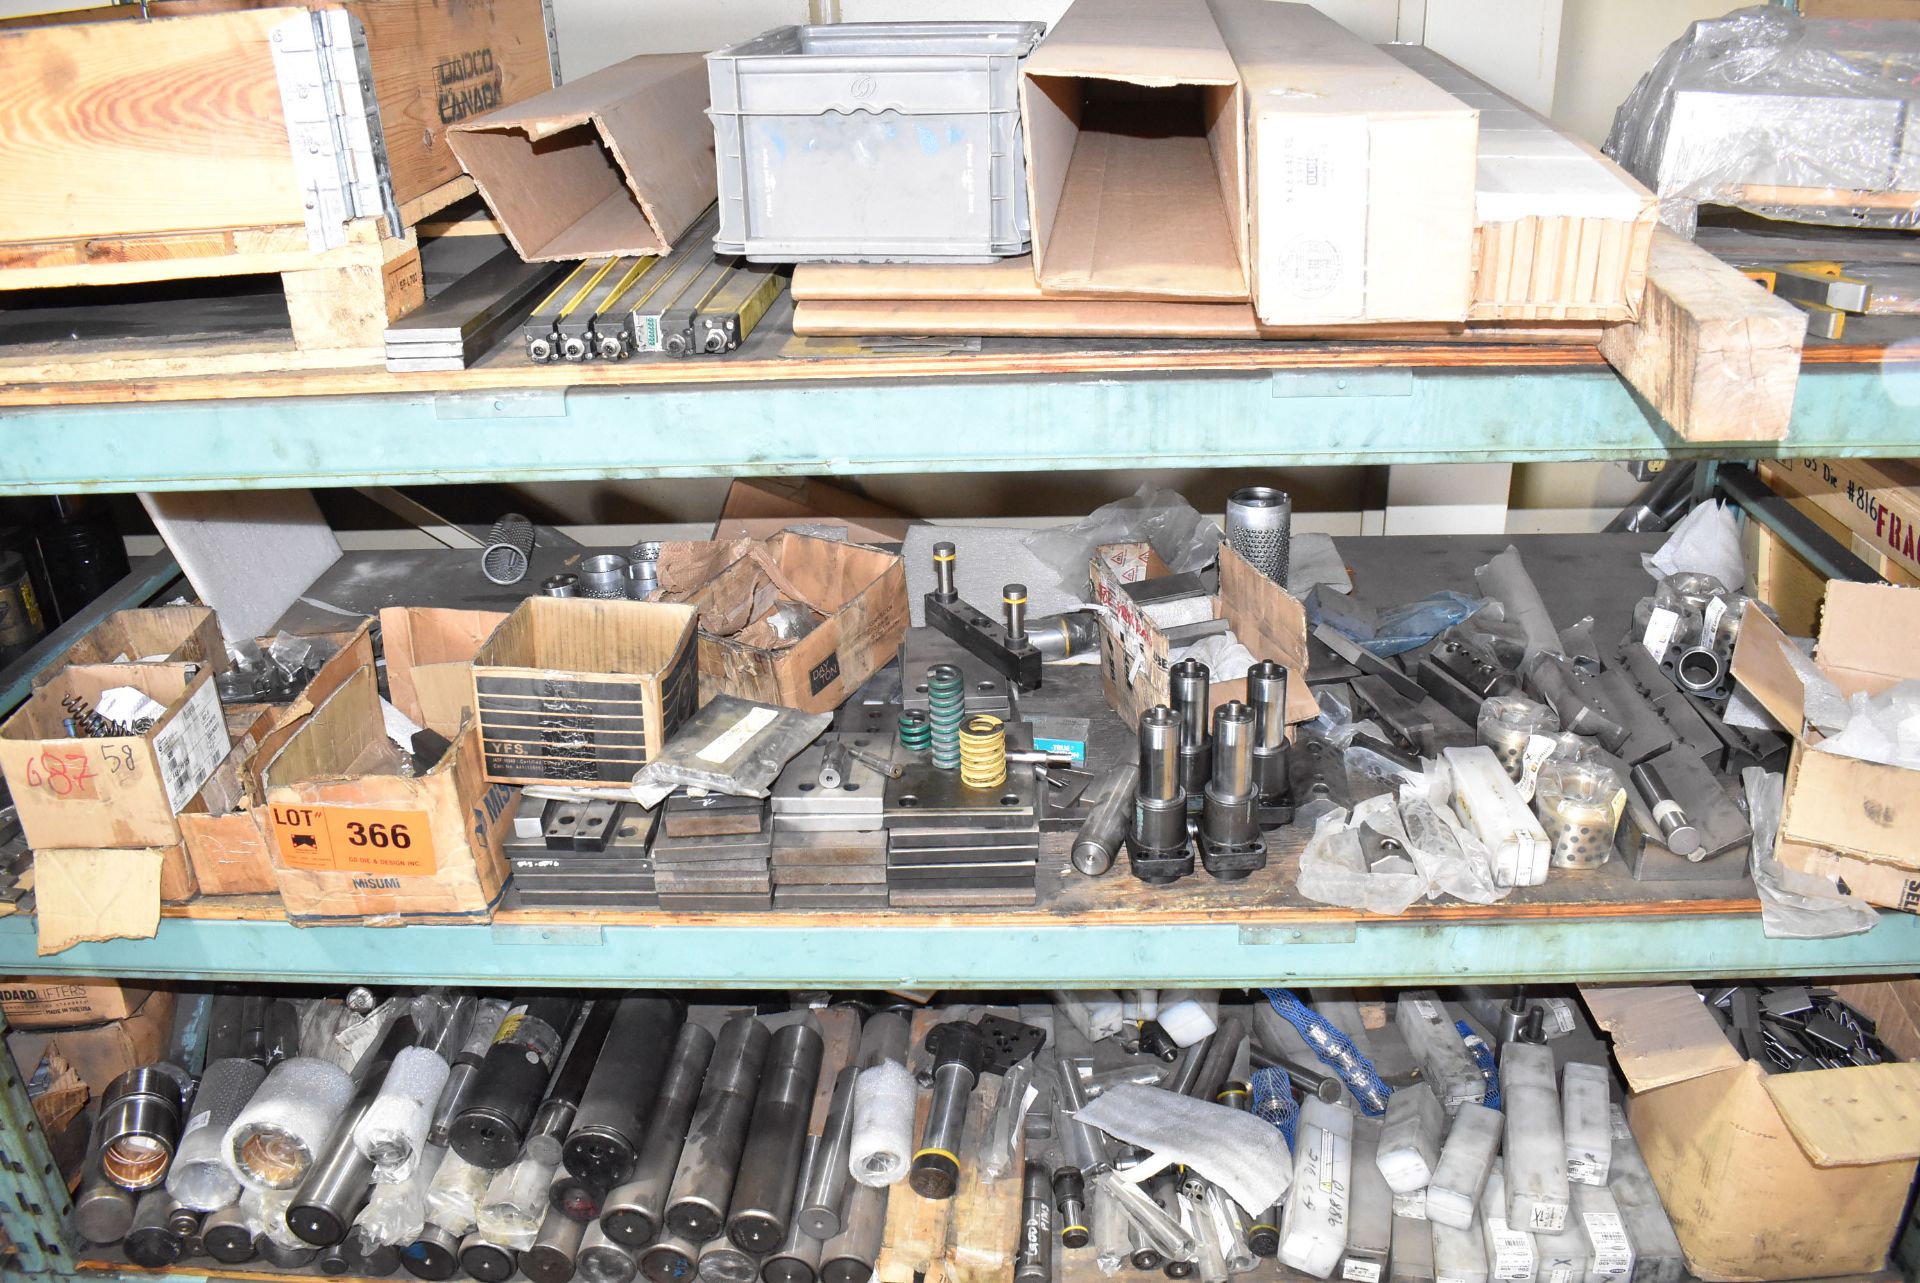 LOT/ CONTENTS OF RACK CONSISTING OF HYDRAULIC CYLINDERS & SUPPLIES